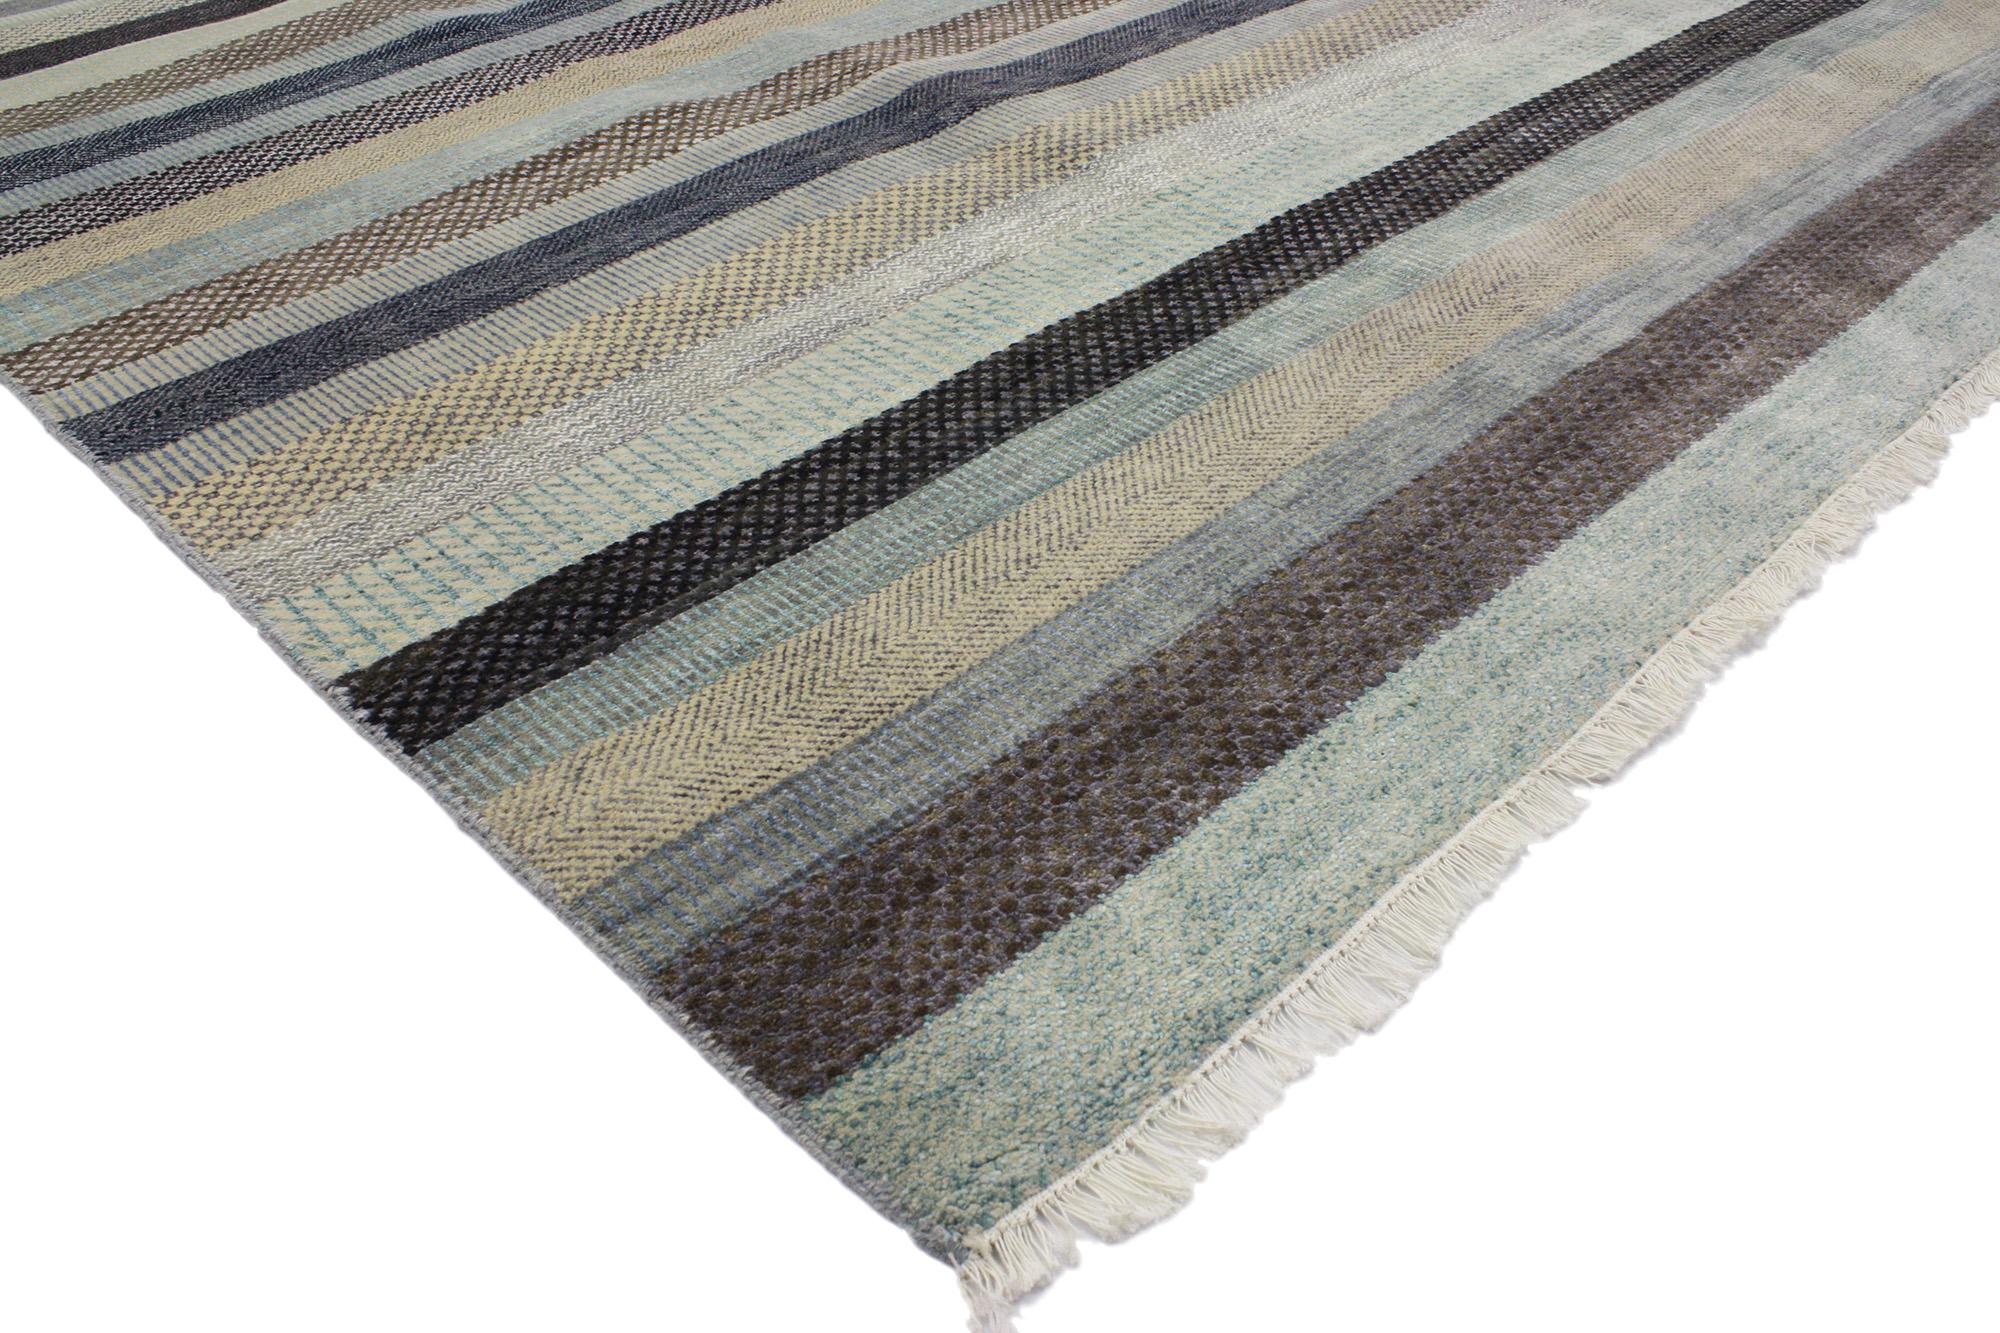 30148 New Modern Coastal Striped Area Rug, 09'00 x 12'03. Crafted with meticulous care, transitional Indian wool and silk rugs represent the epitome of exquisite handcrafted carpets, seamlessly blending traditional weaving techniques from India with